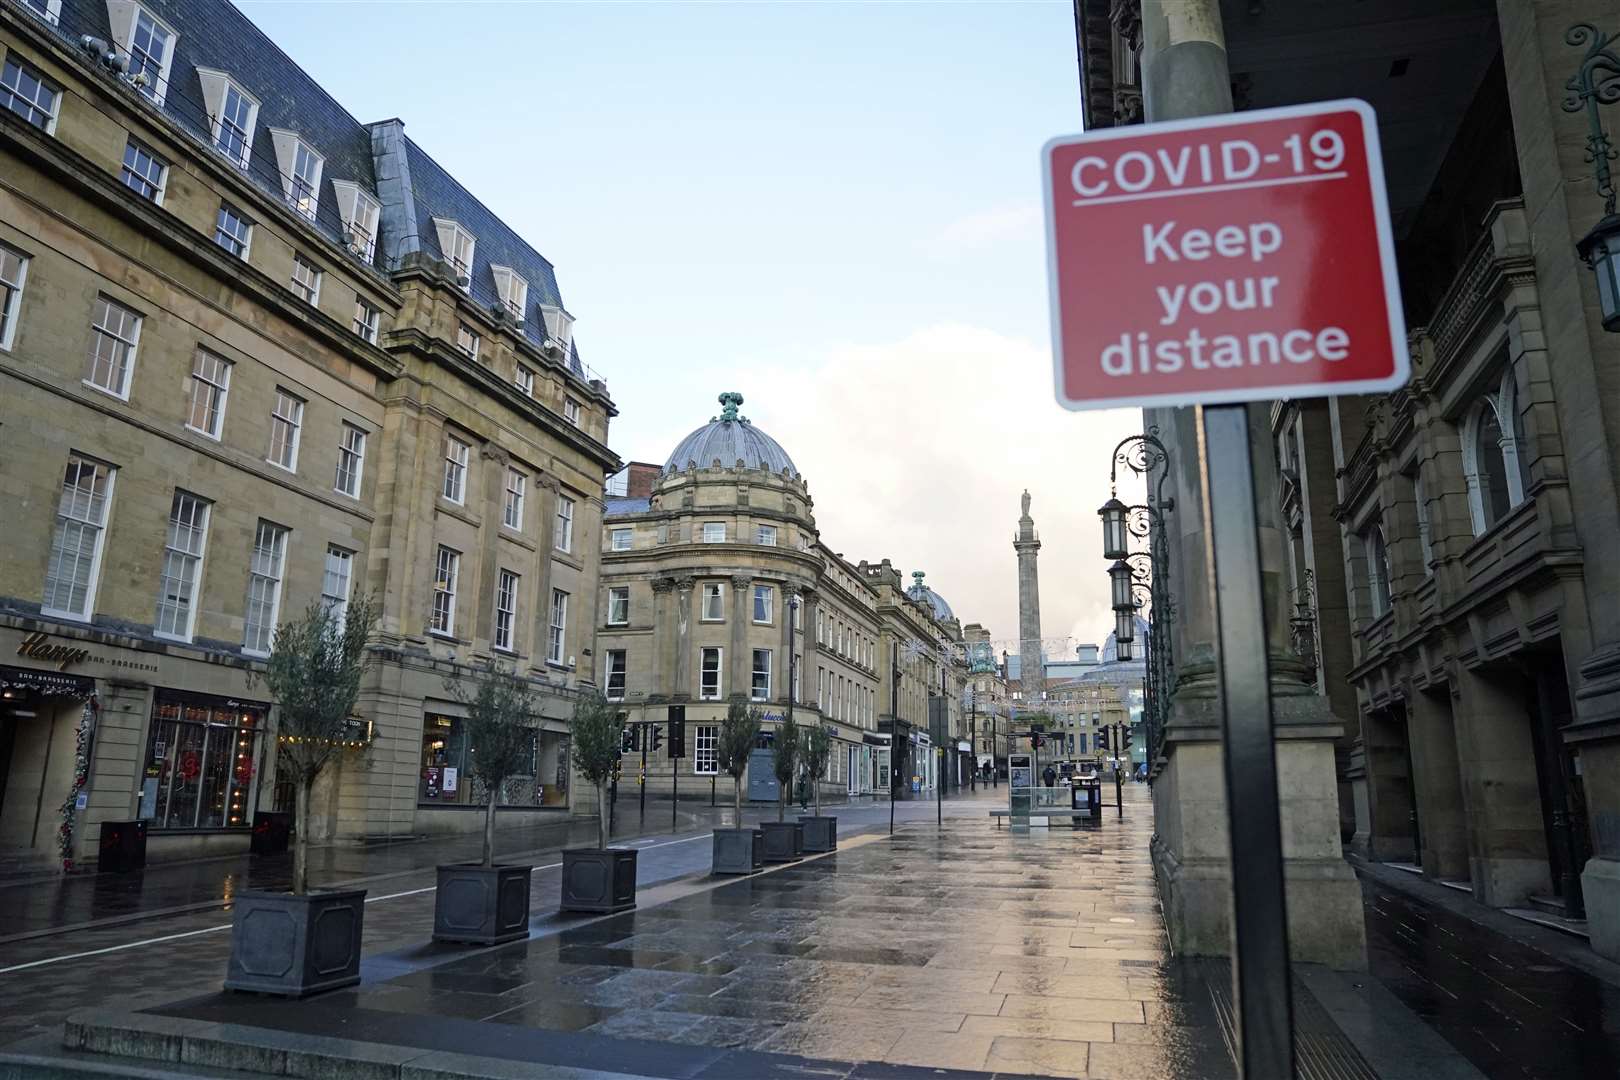 High streets are deserted as new lockdown measures are introduced (Owen Humphreys/PA)